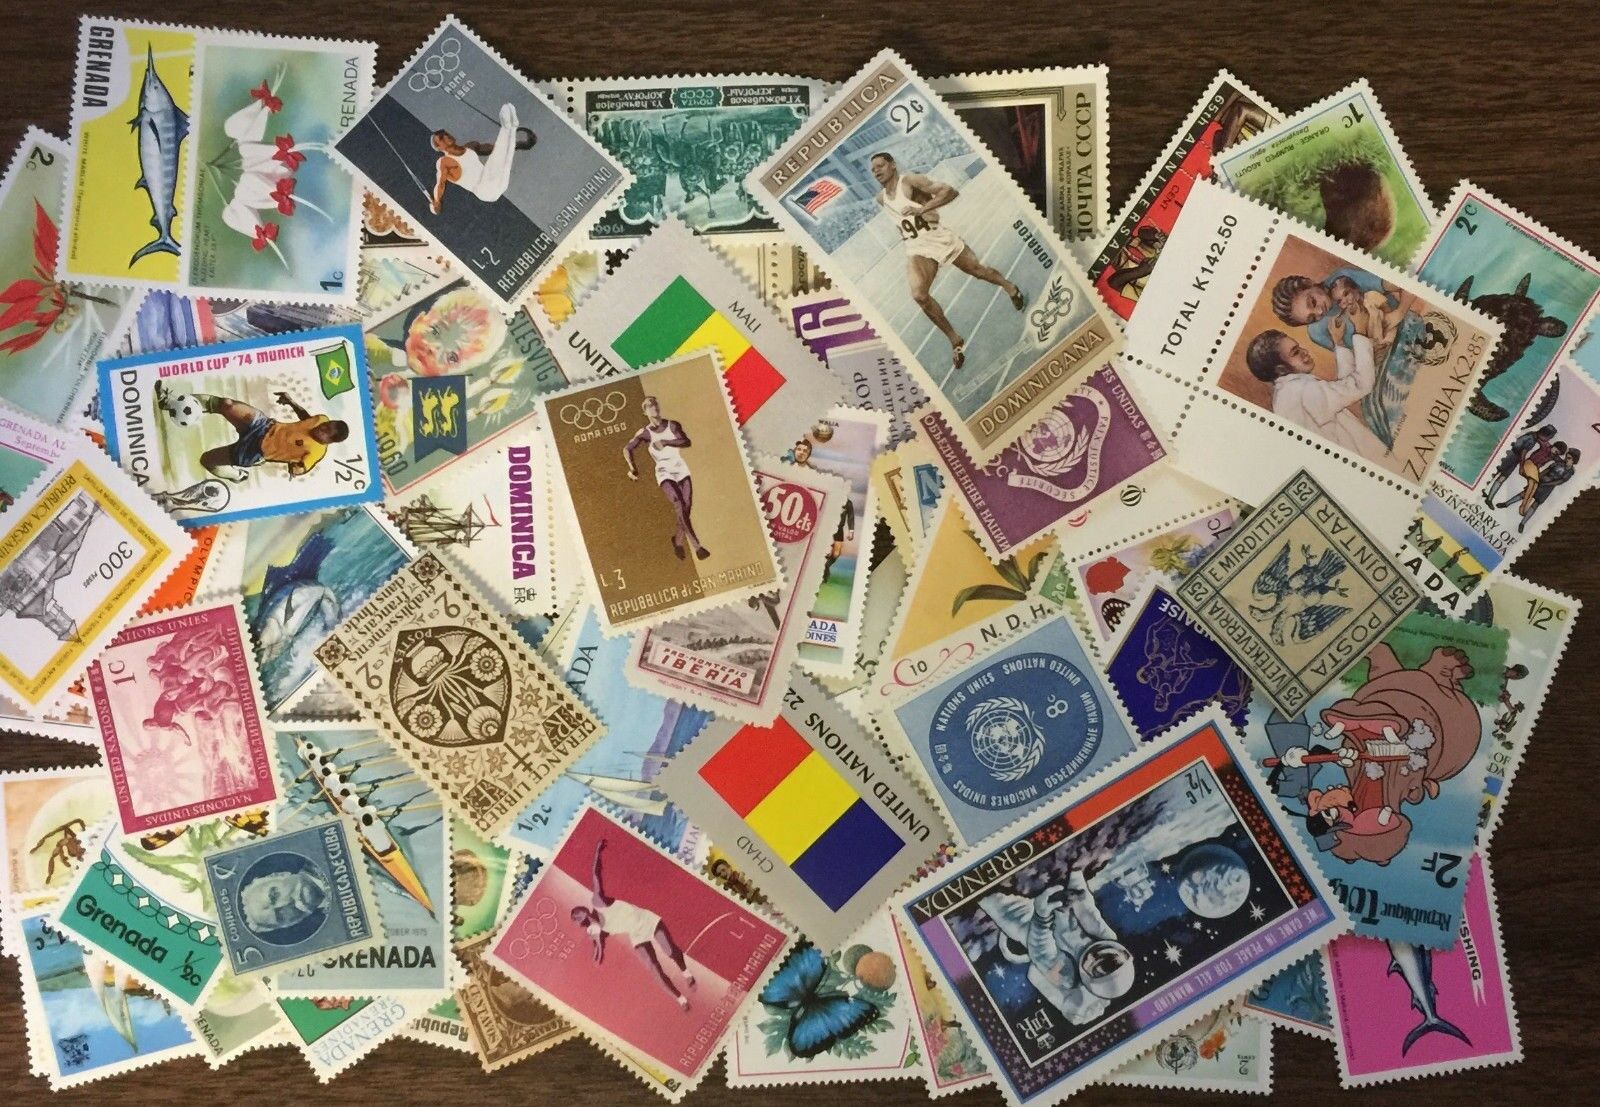 [lot B] 100 Different Mint/mh/mnh/mng Worldwide Stamp Collection- Great Value!